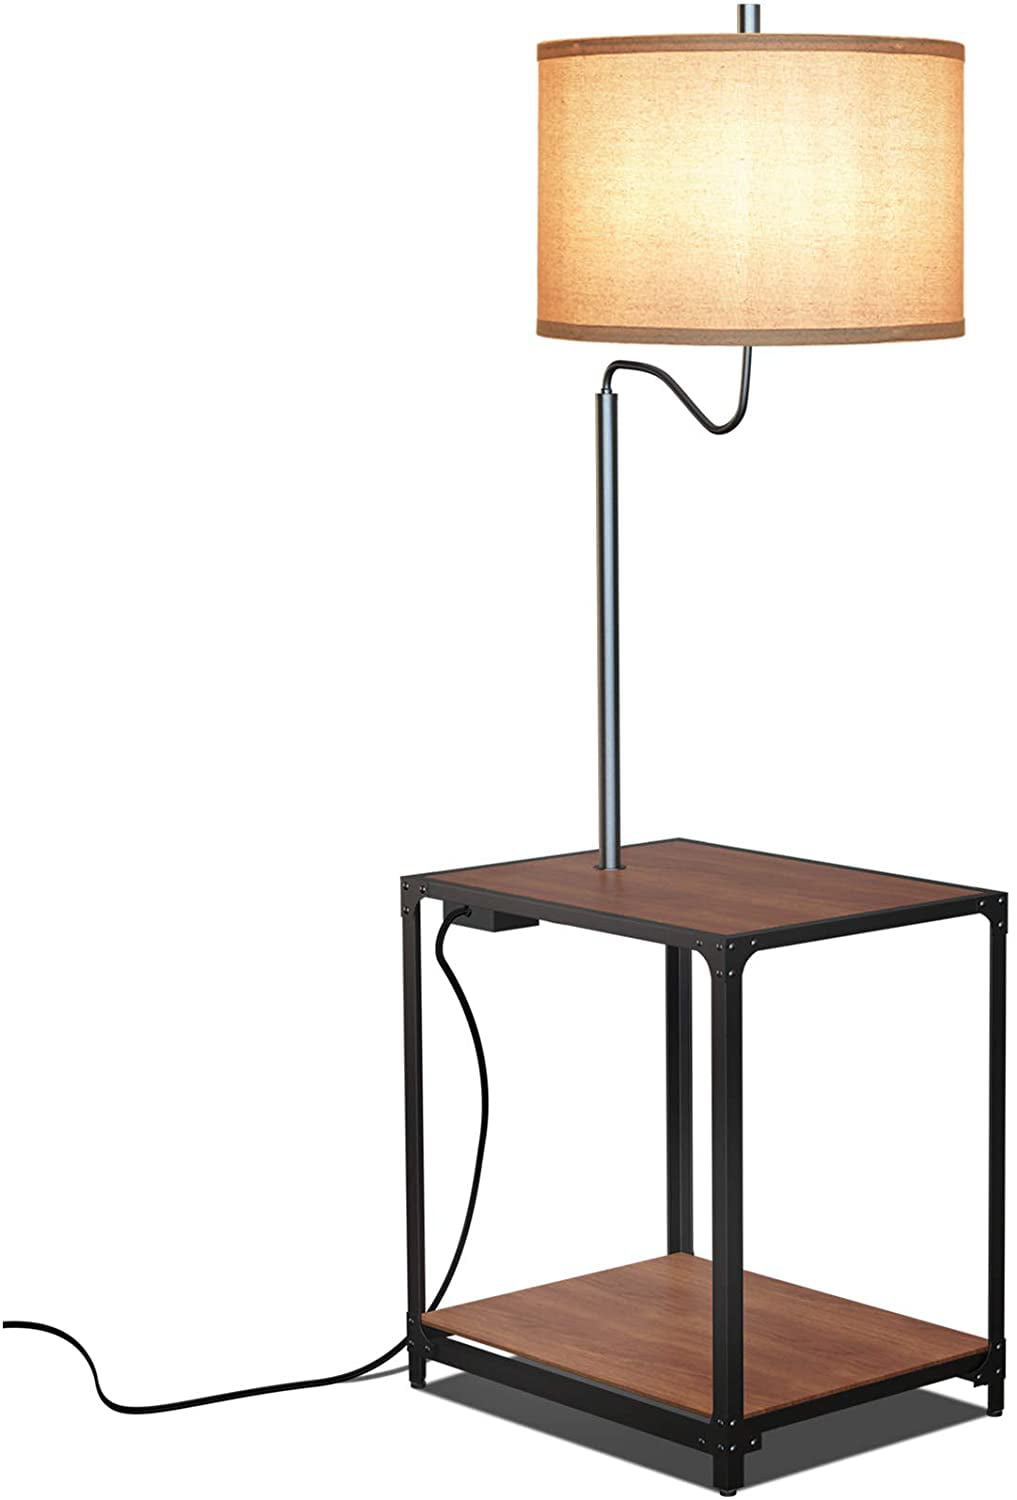 Led Floor Lamp With End Table And Usb, End Table With Lamp Attached And Usb Port